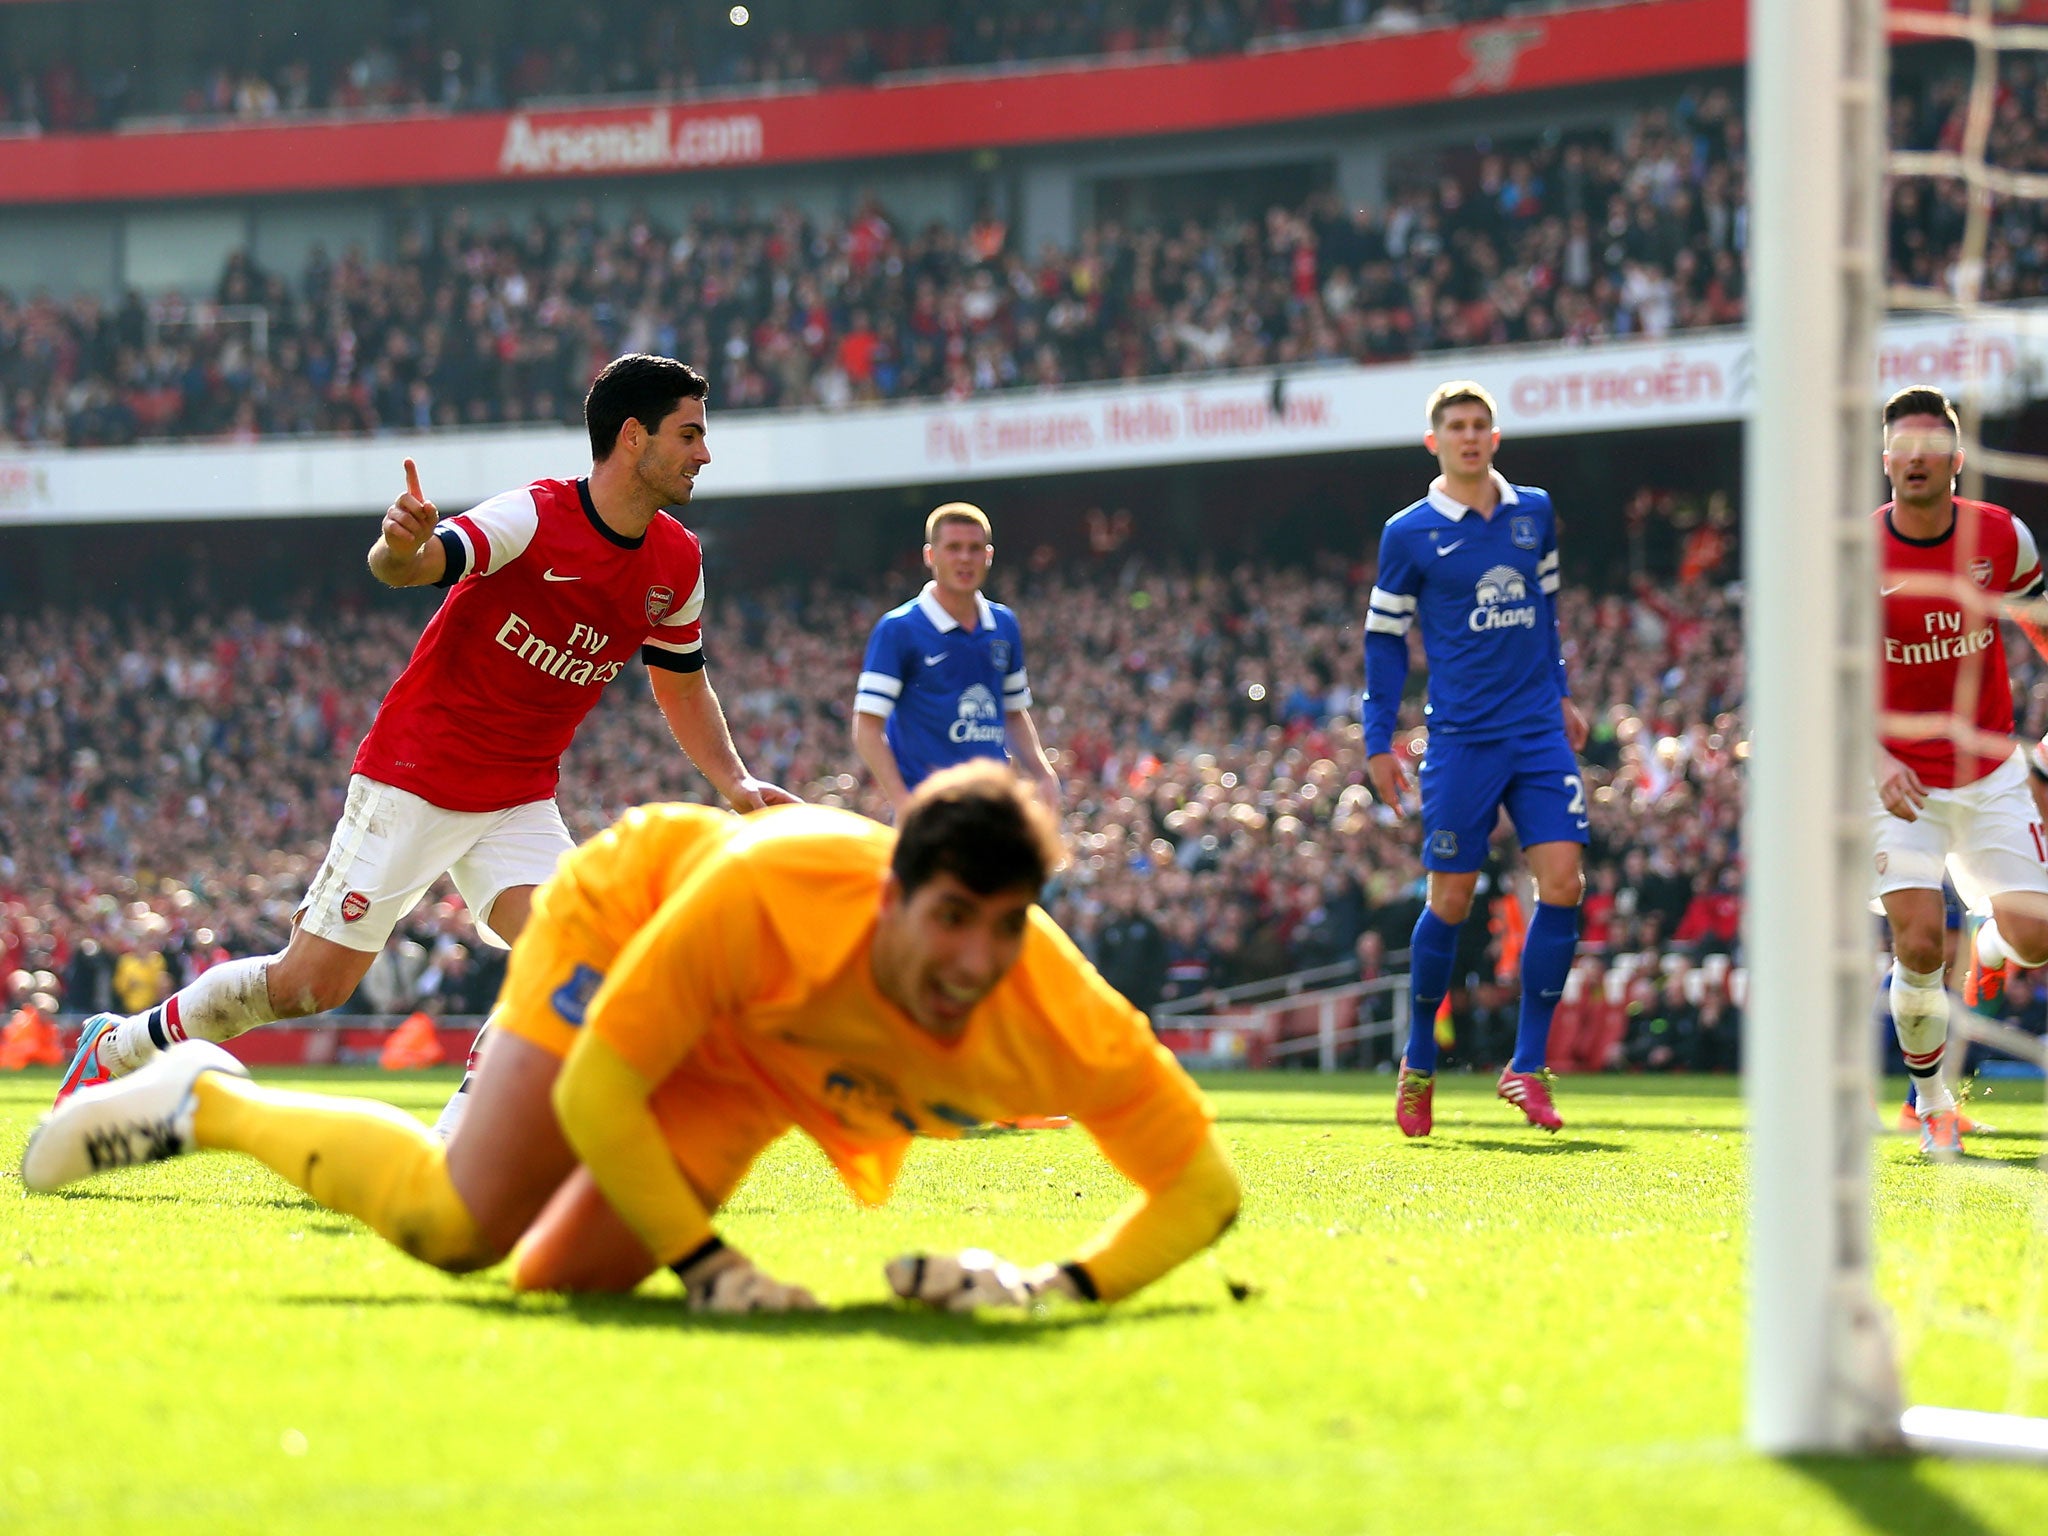 Mikel Arteta scores from the penalty spot in Arsenal's 4-1 victory over Everton in the fifth round on Saturday